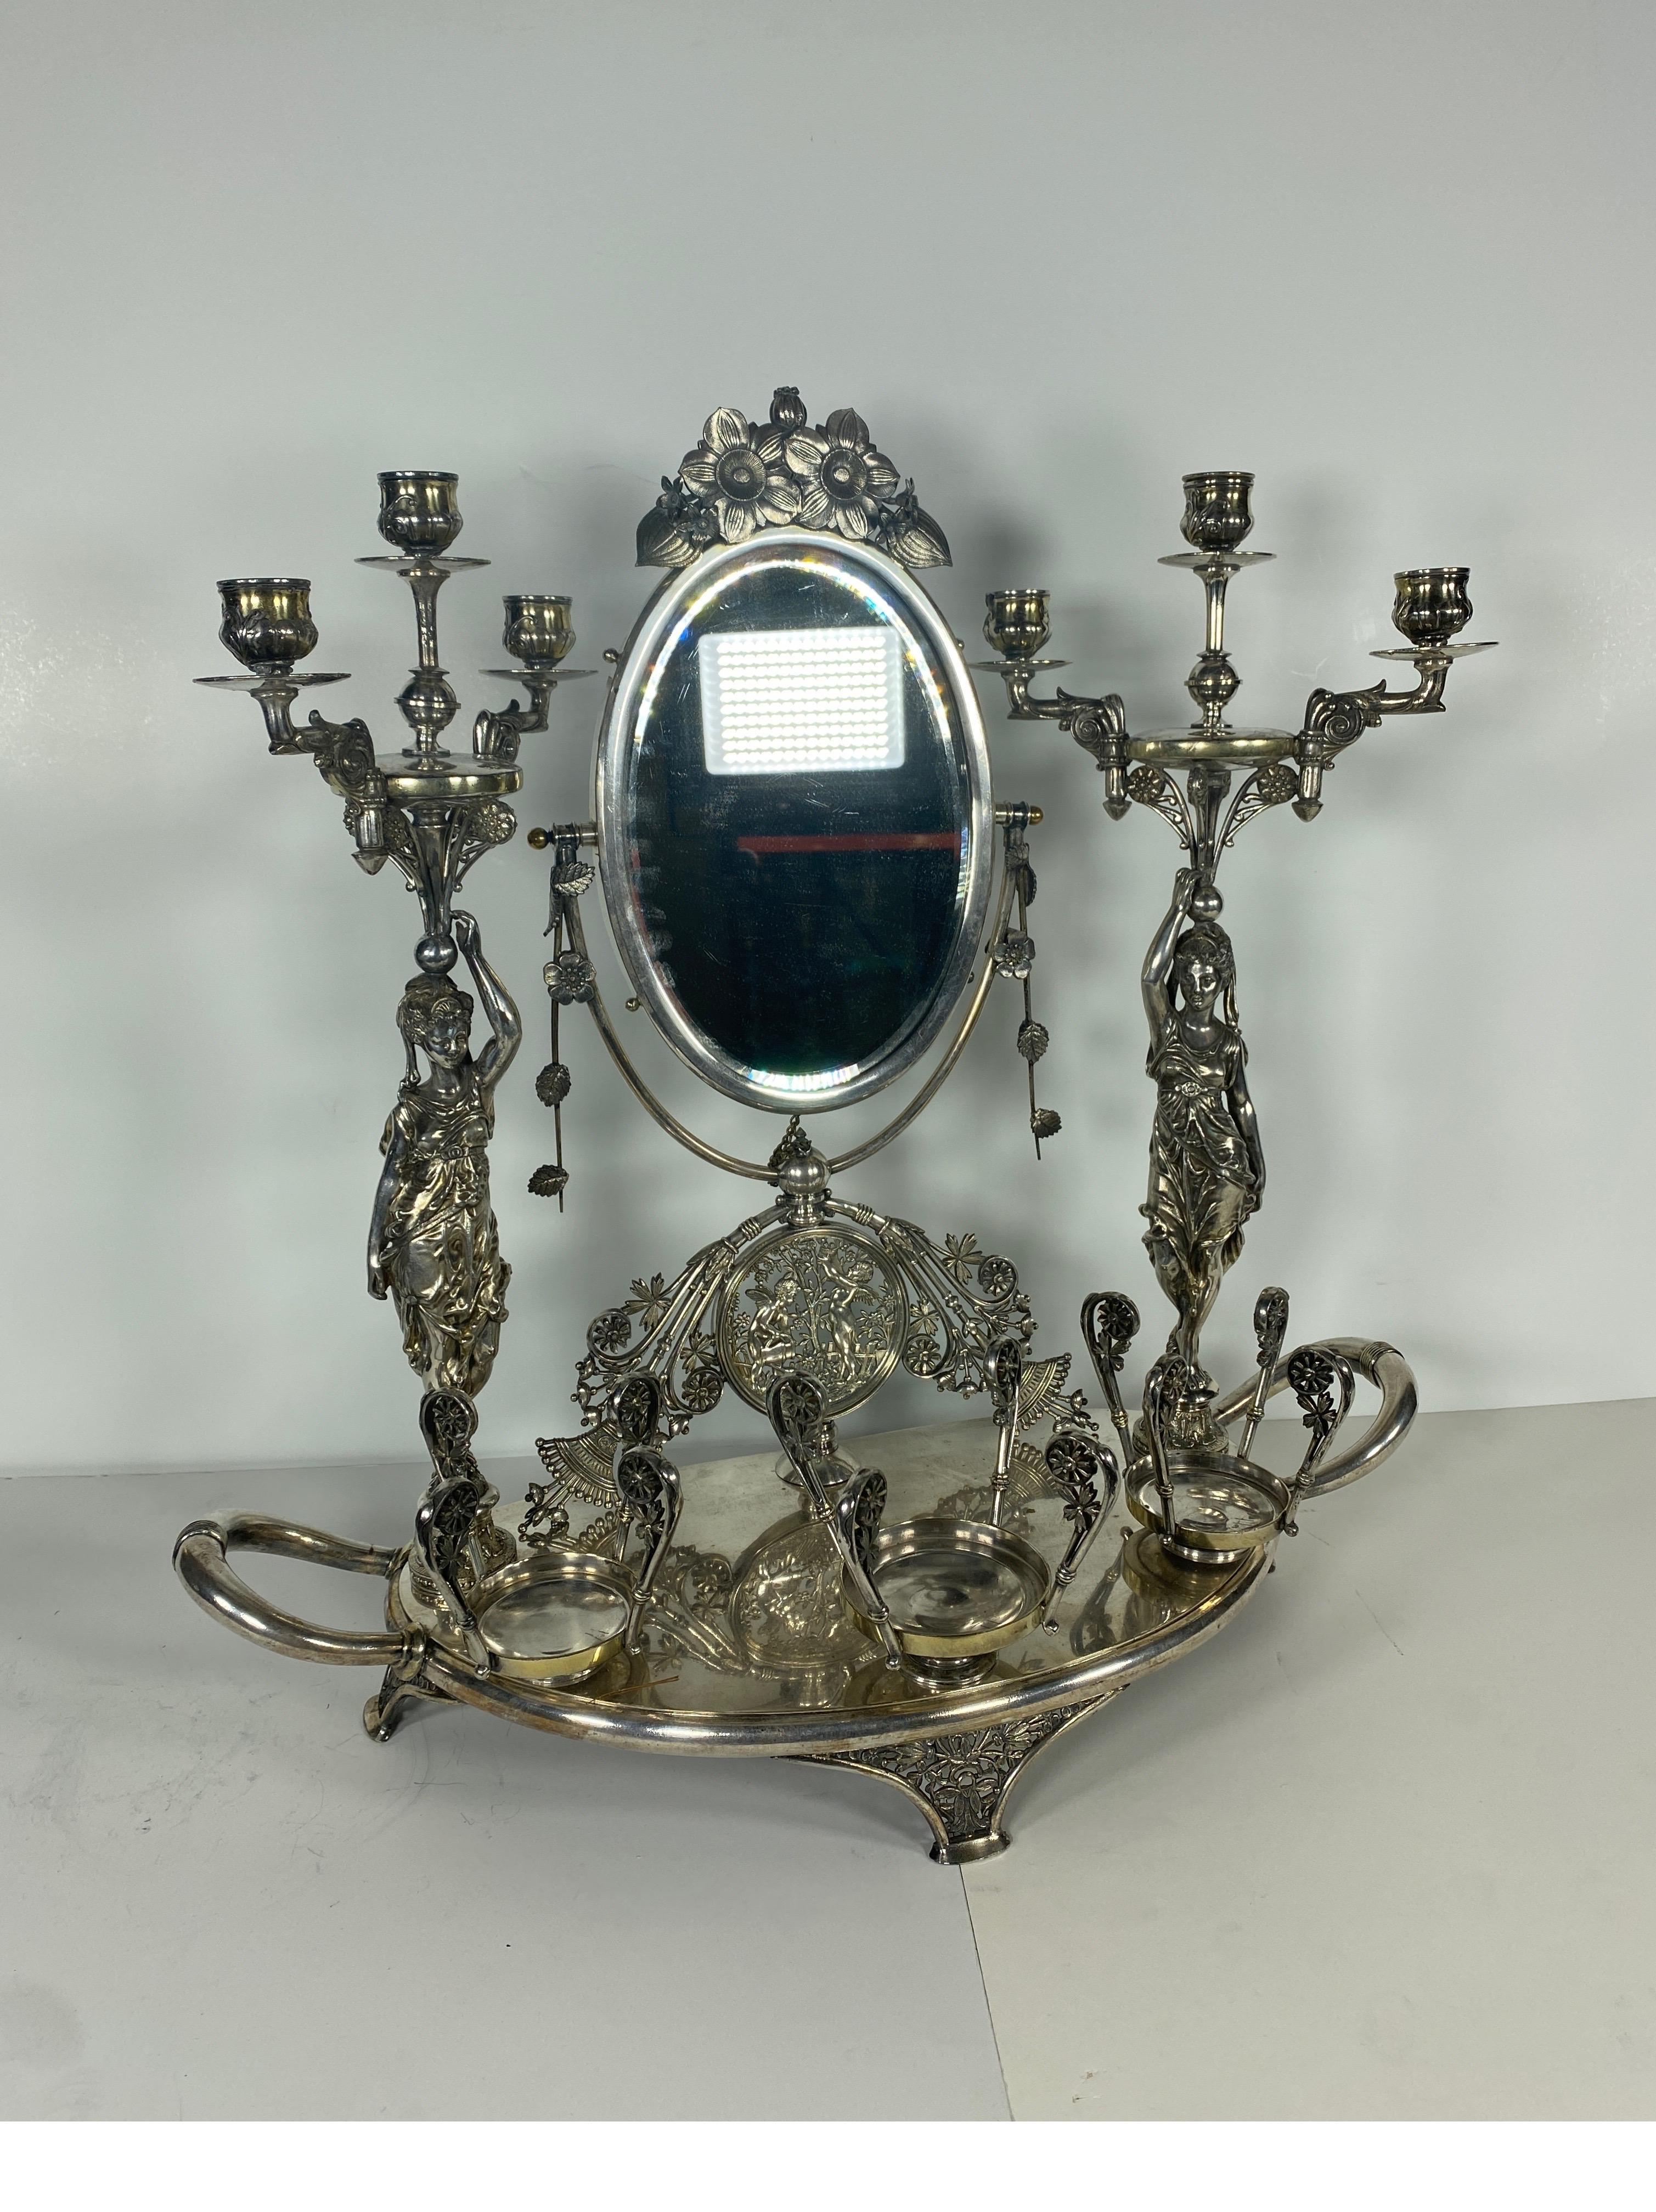 A rare American silvered bronze vanity toilet set by Meriden, circa 1870

Beautifully cast with two fully robed maidens holding up a 3 branch candelabra. The central oval mirror with gilt highlights and a floral Victorian finial. The bottom